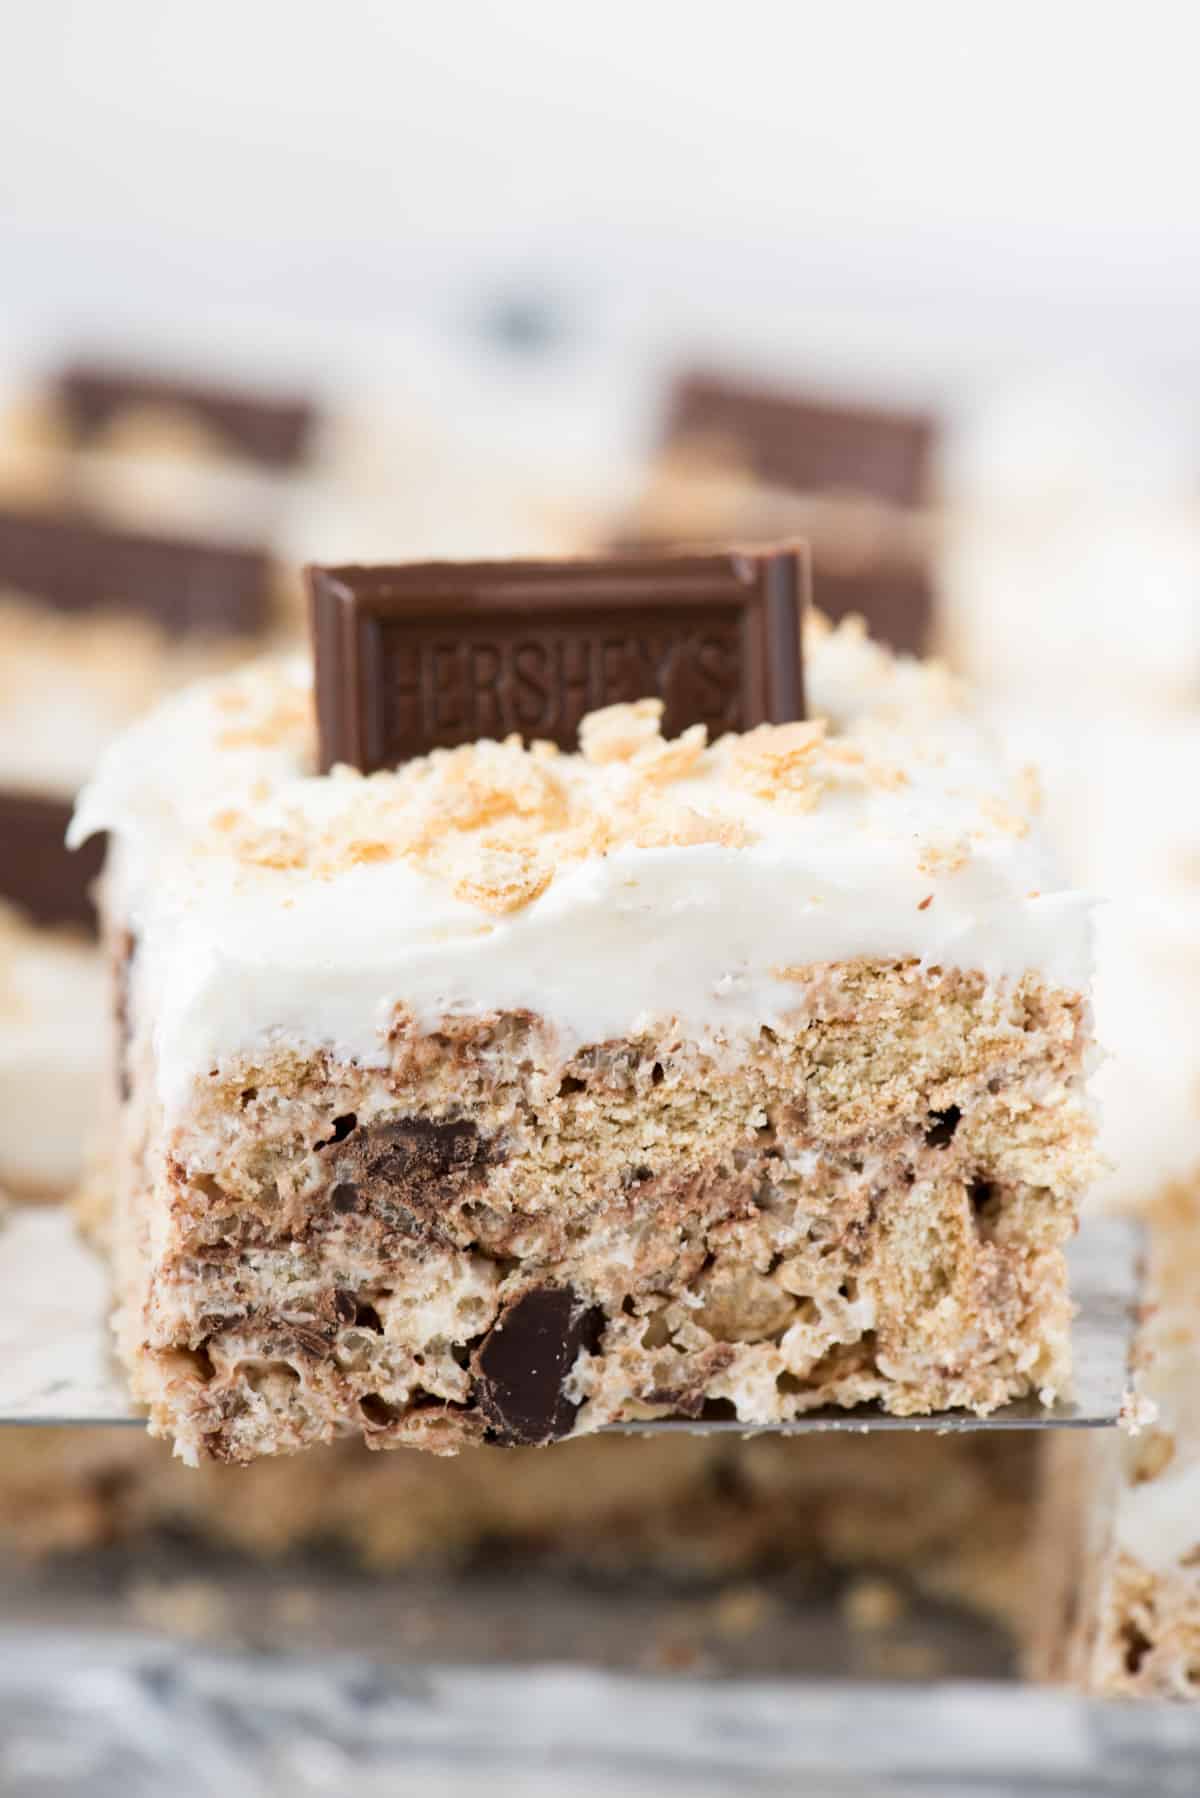 Rice krispie s’mores treat with marshmallow frosting topped with hershey’s bar on metal serving utensil 